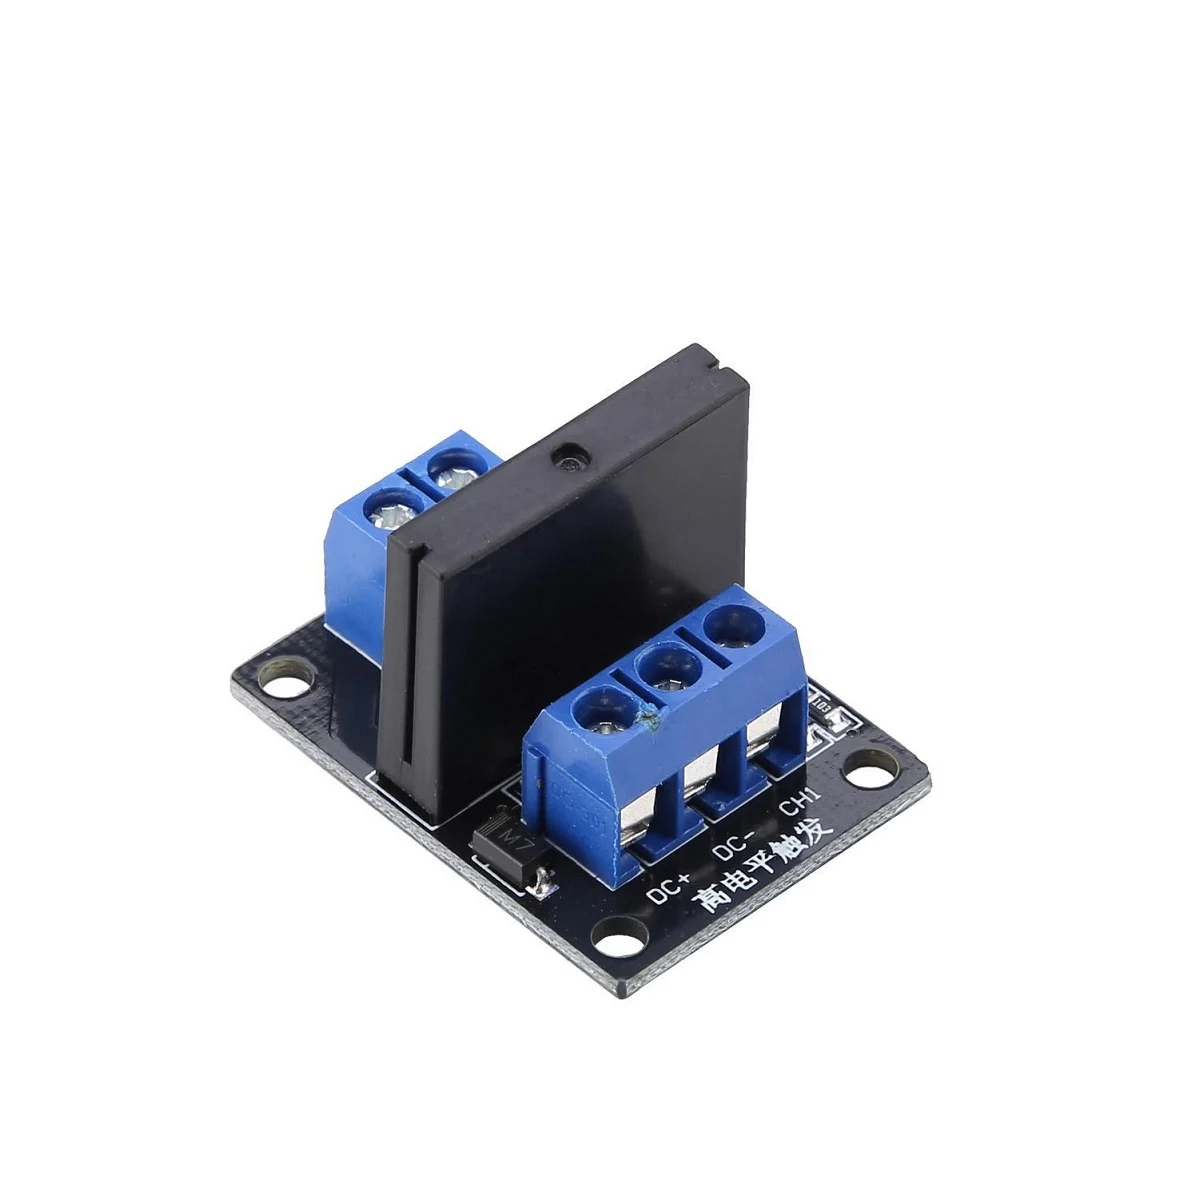 Channel 5V Relay Module Solid State High Level SSR DC Control 250V 2A with Resistive Fuse